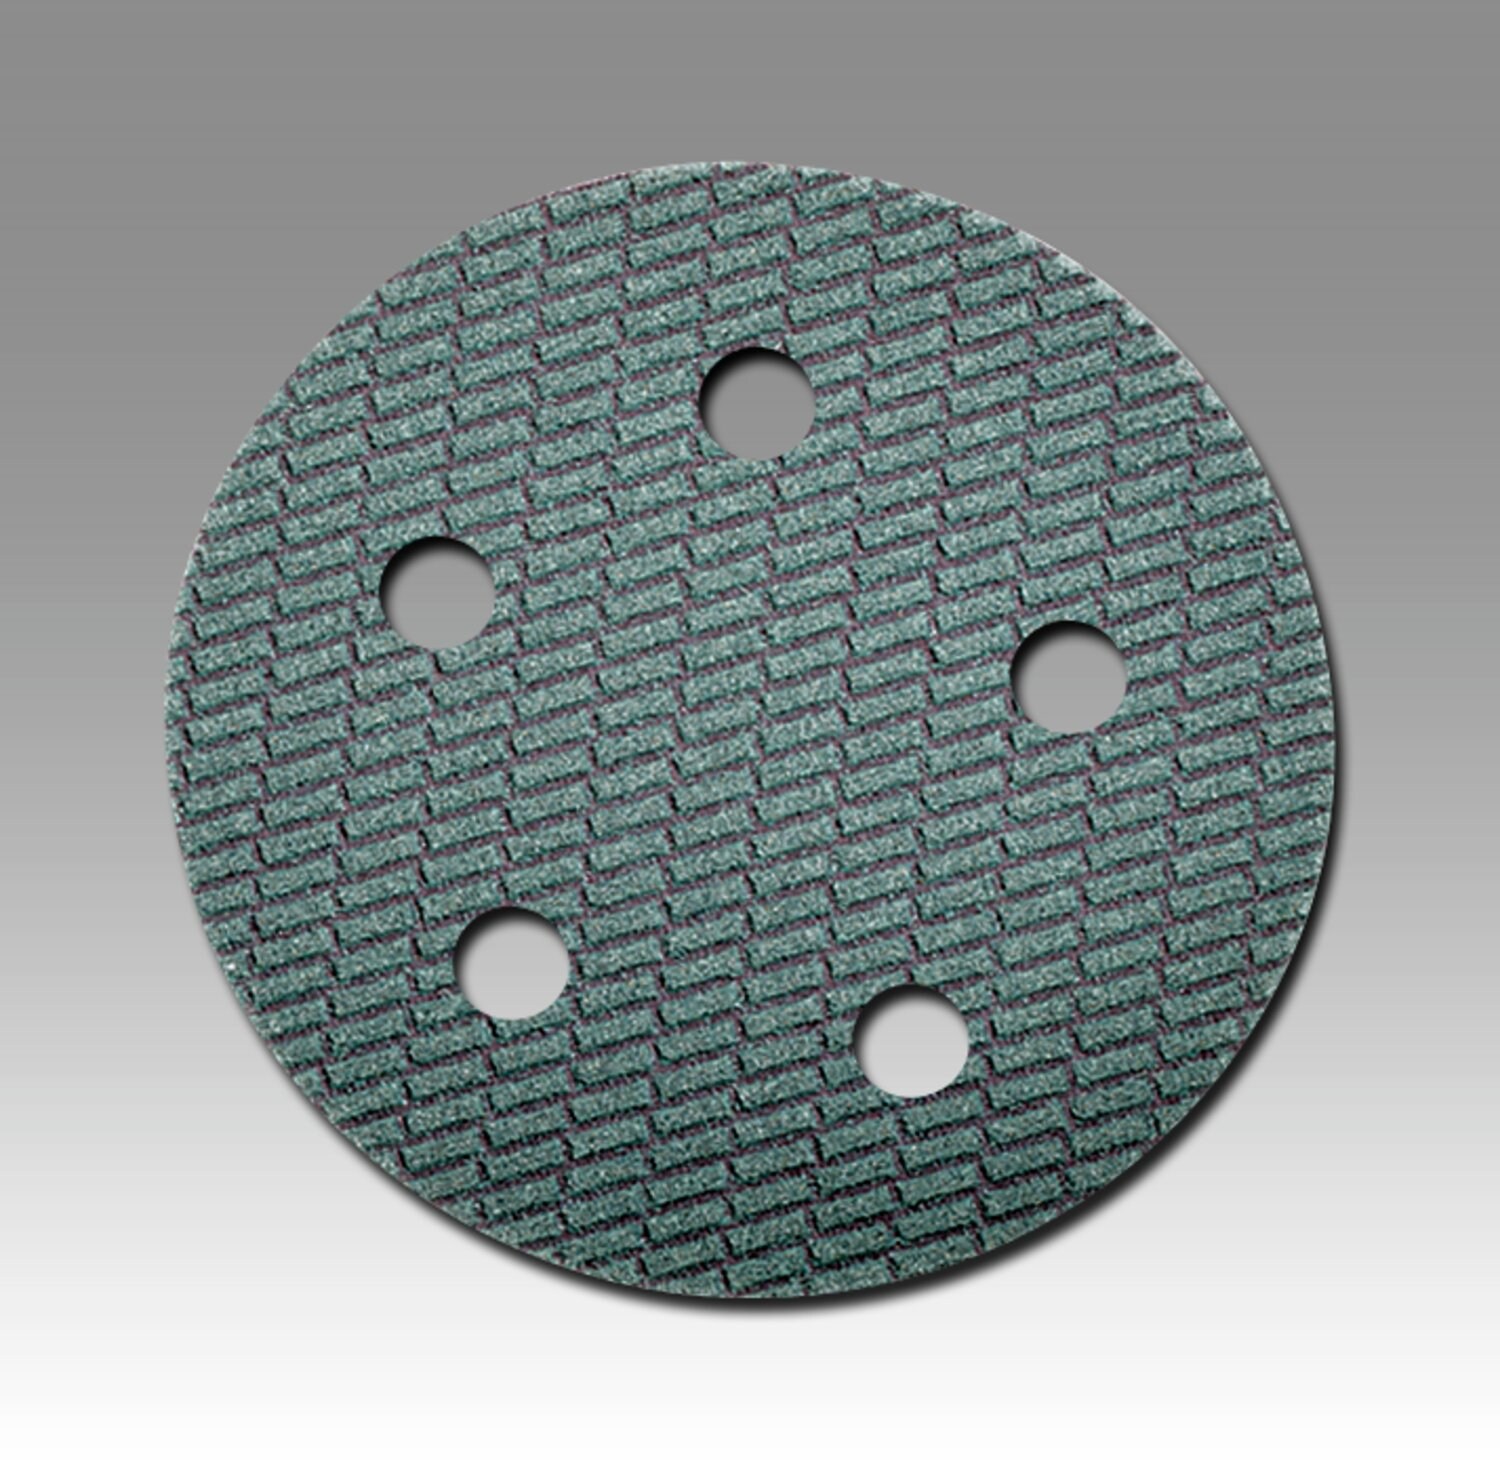 7010329295 - 3M Trizact Hookit Cloth Disc 337DC, 5 in x NH, 5 Hole, A300 X-weight,
D/F, Die 500FH, 50 ea/Case